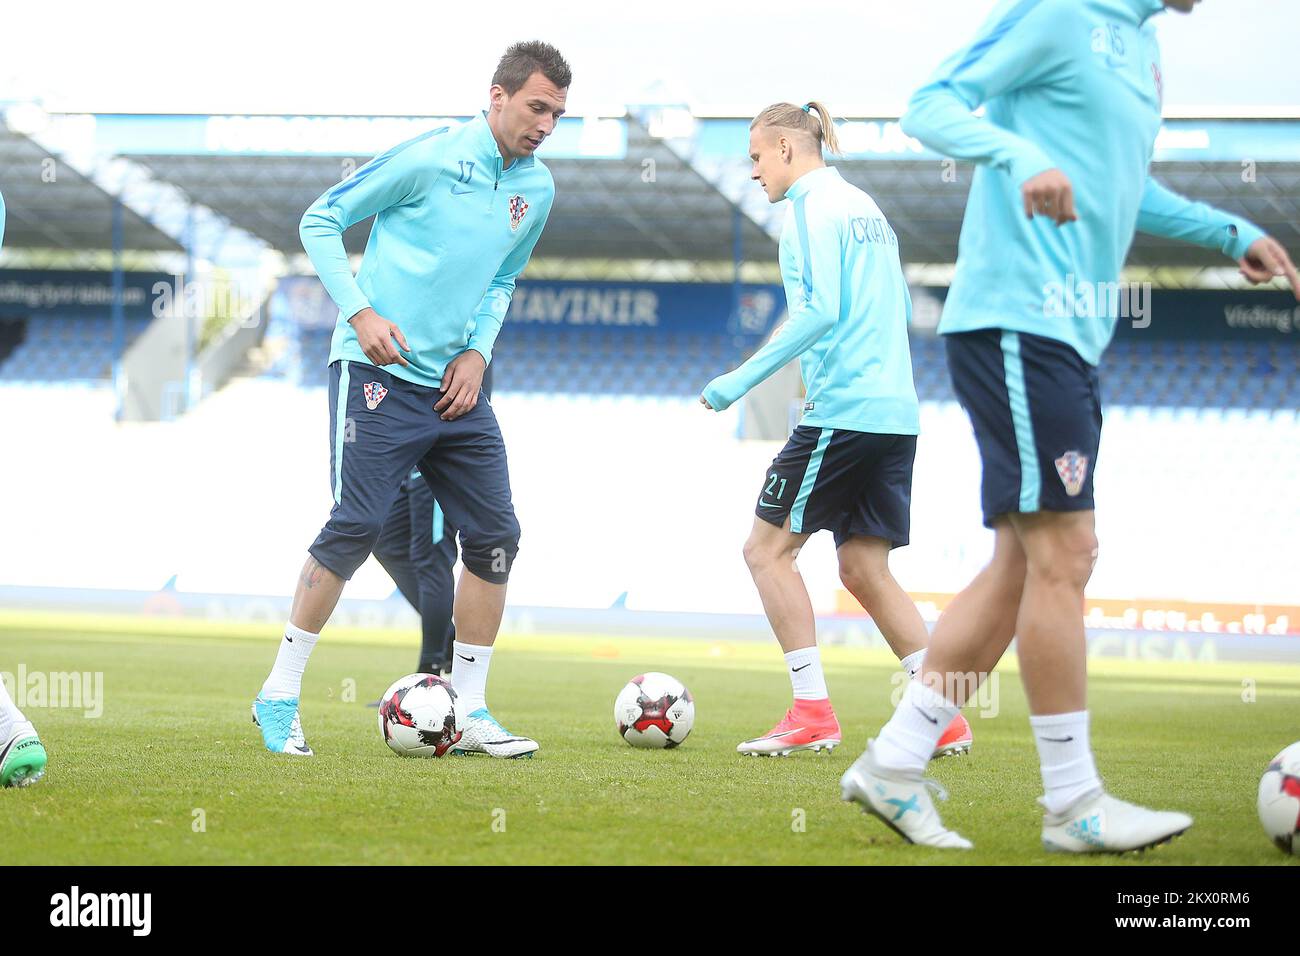 10.06.2017., Stadium Laugardalsvollur, Reykjavik, Iceland - Training of the Croatian Football Team on the day before the qualifying match with Iceland for the World Championships in Russia in 2018. Mario Mandzukic. Photo: Goran Stanzl/PIXSELL Stock Photo